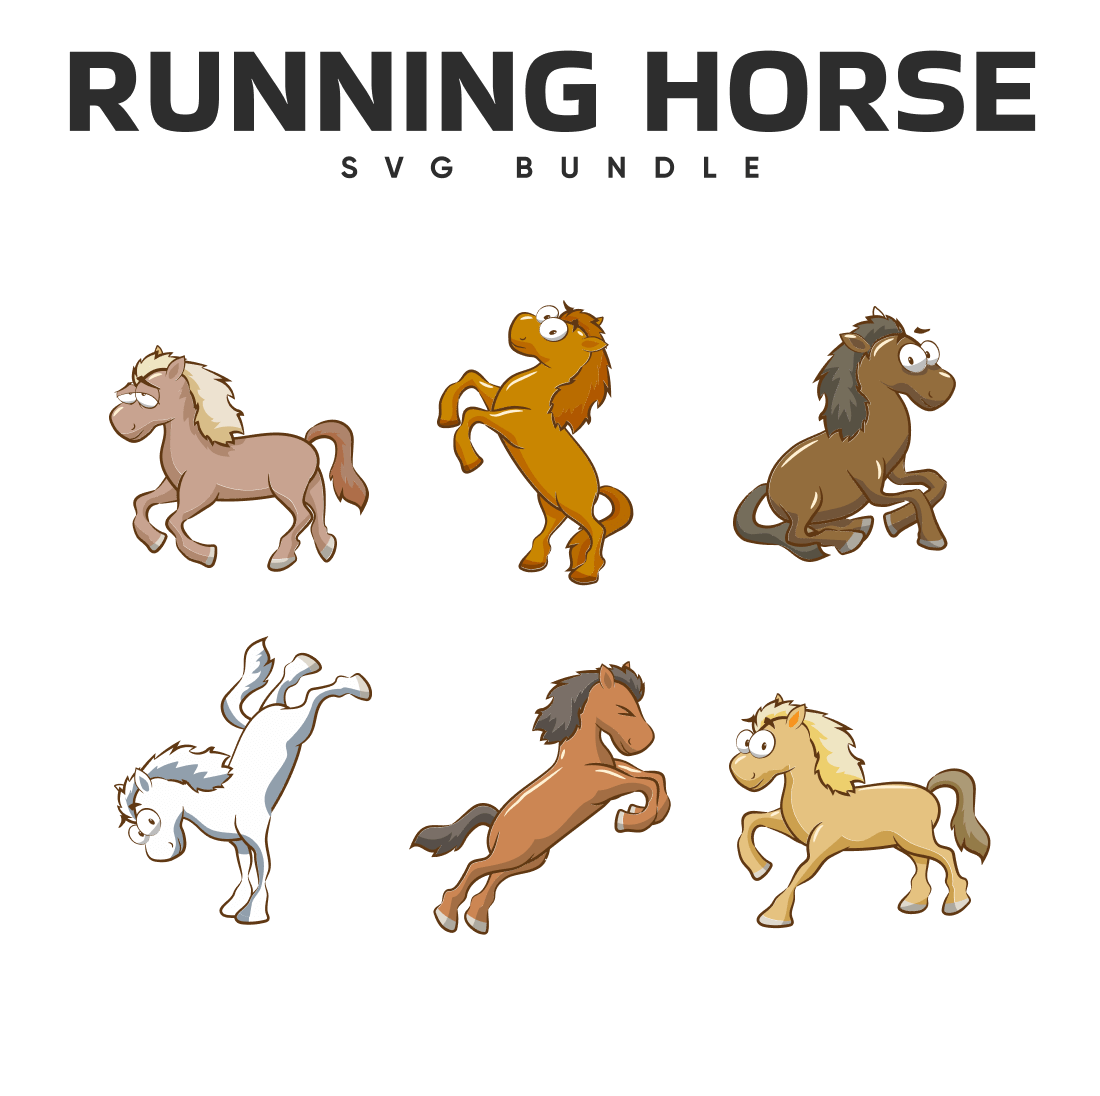 The running horse svg bundle includes a horse.